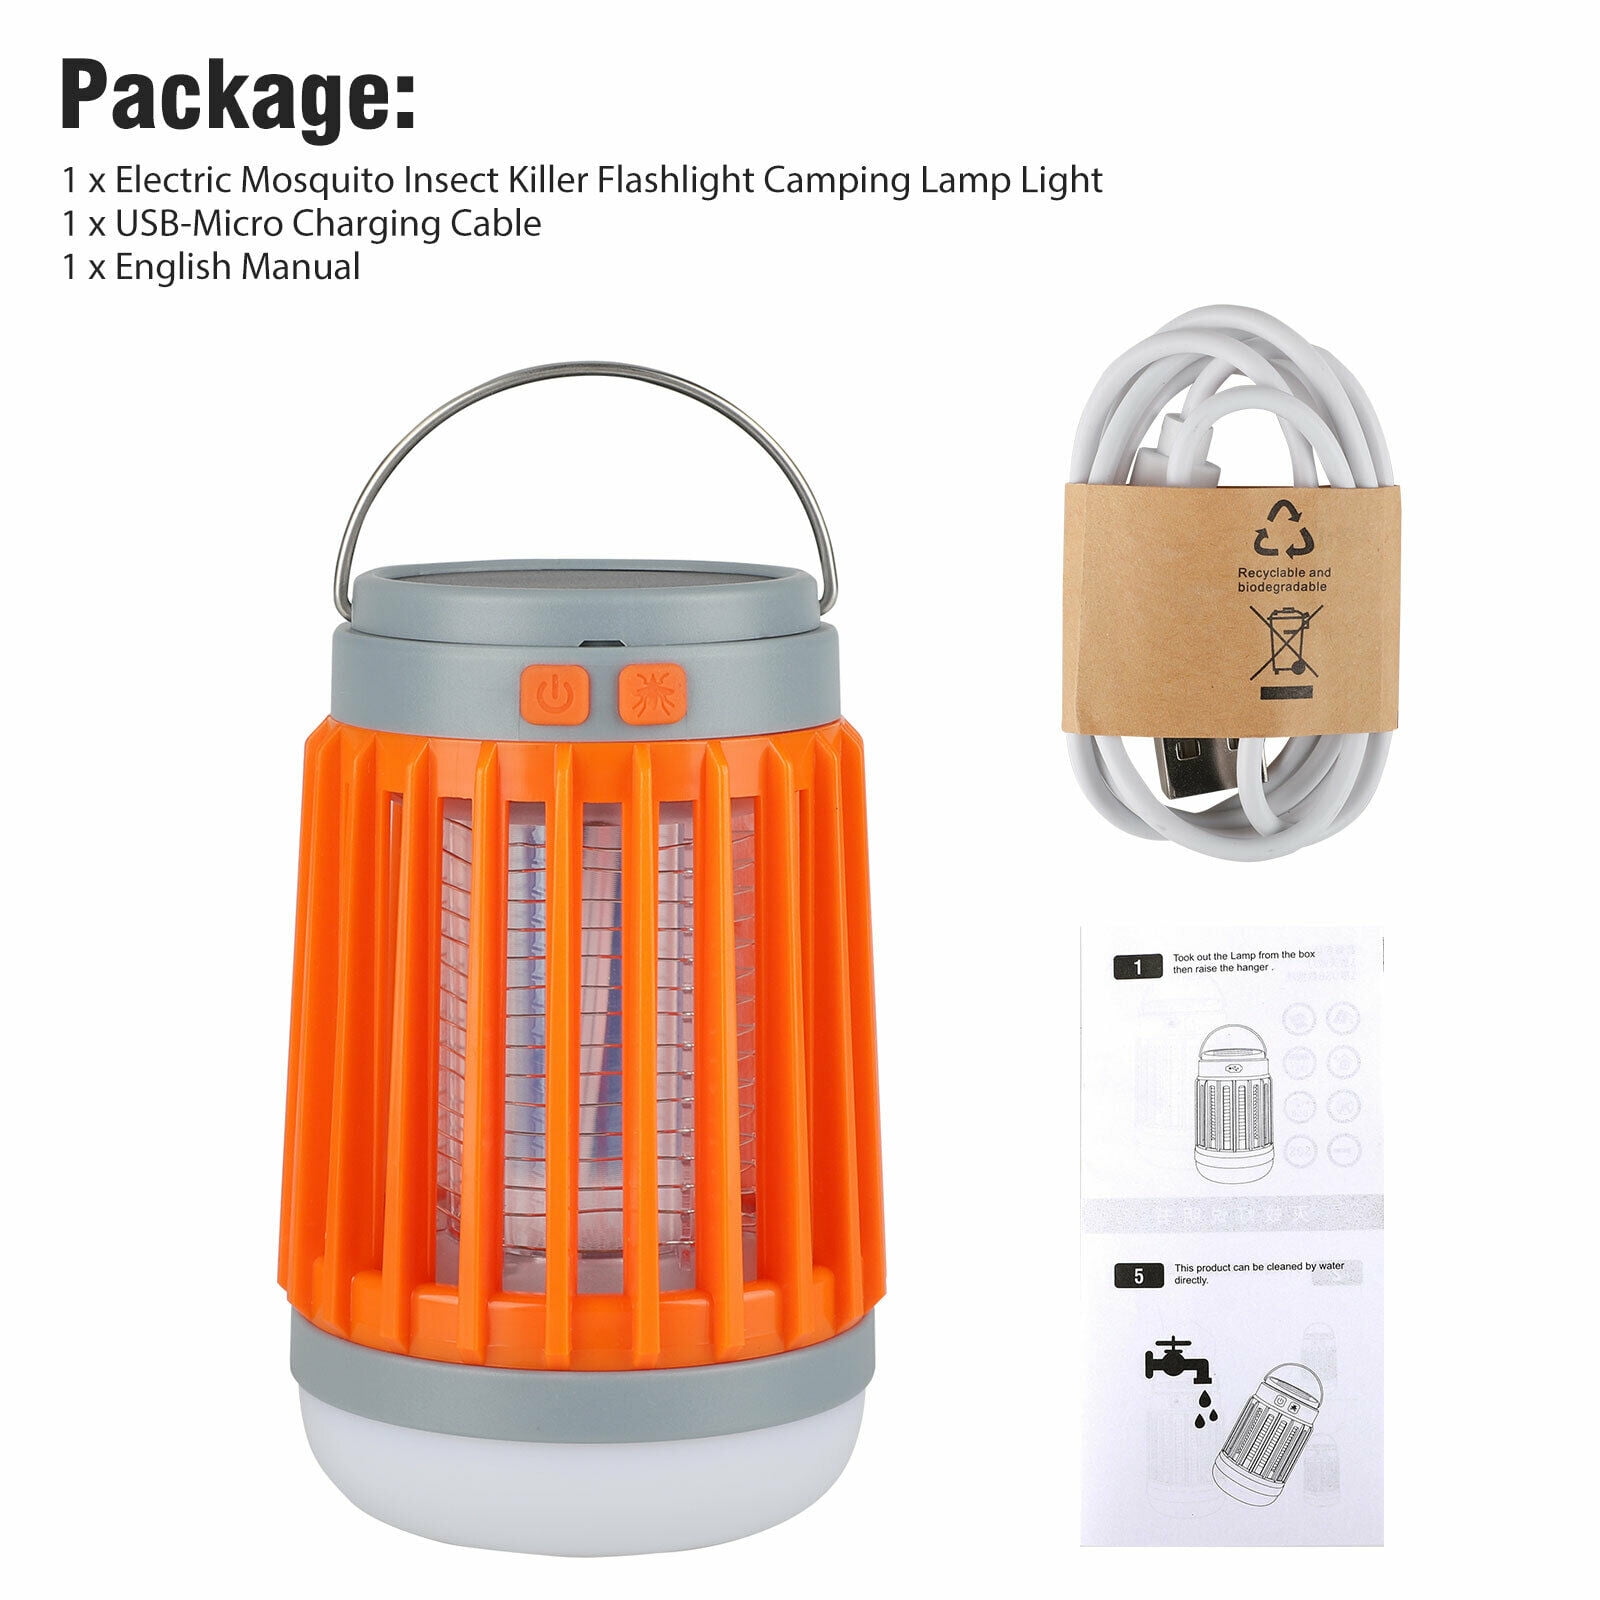 3 in 1 Outdoor Bug Zapper for Camping with LED Lantern,USB Rechargeable Lamp Bui 